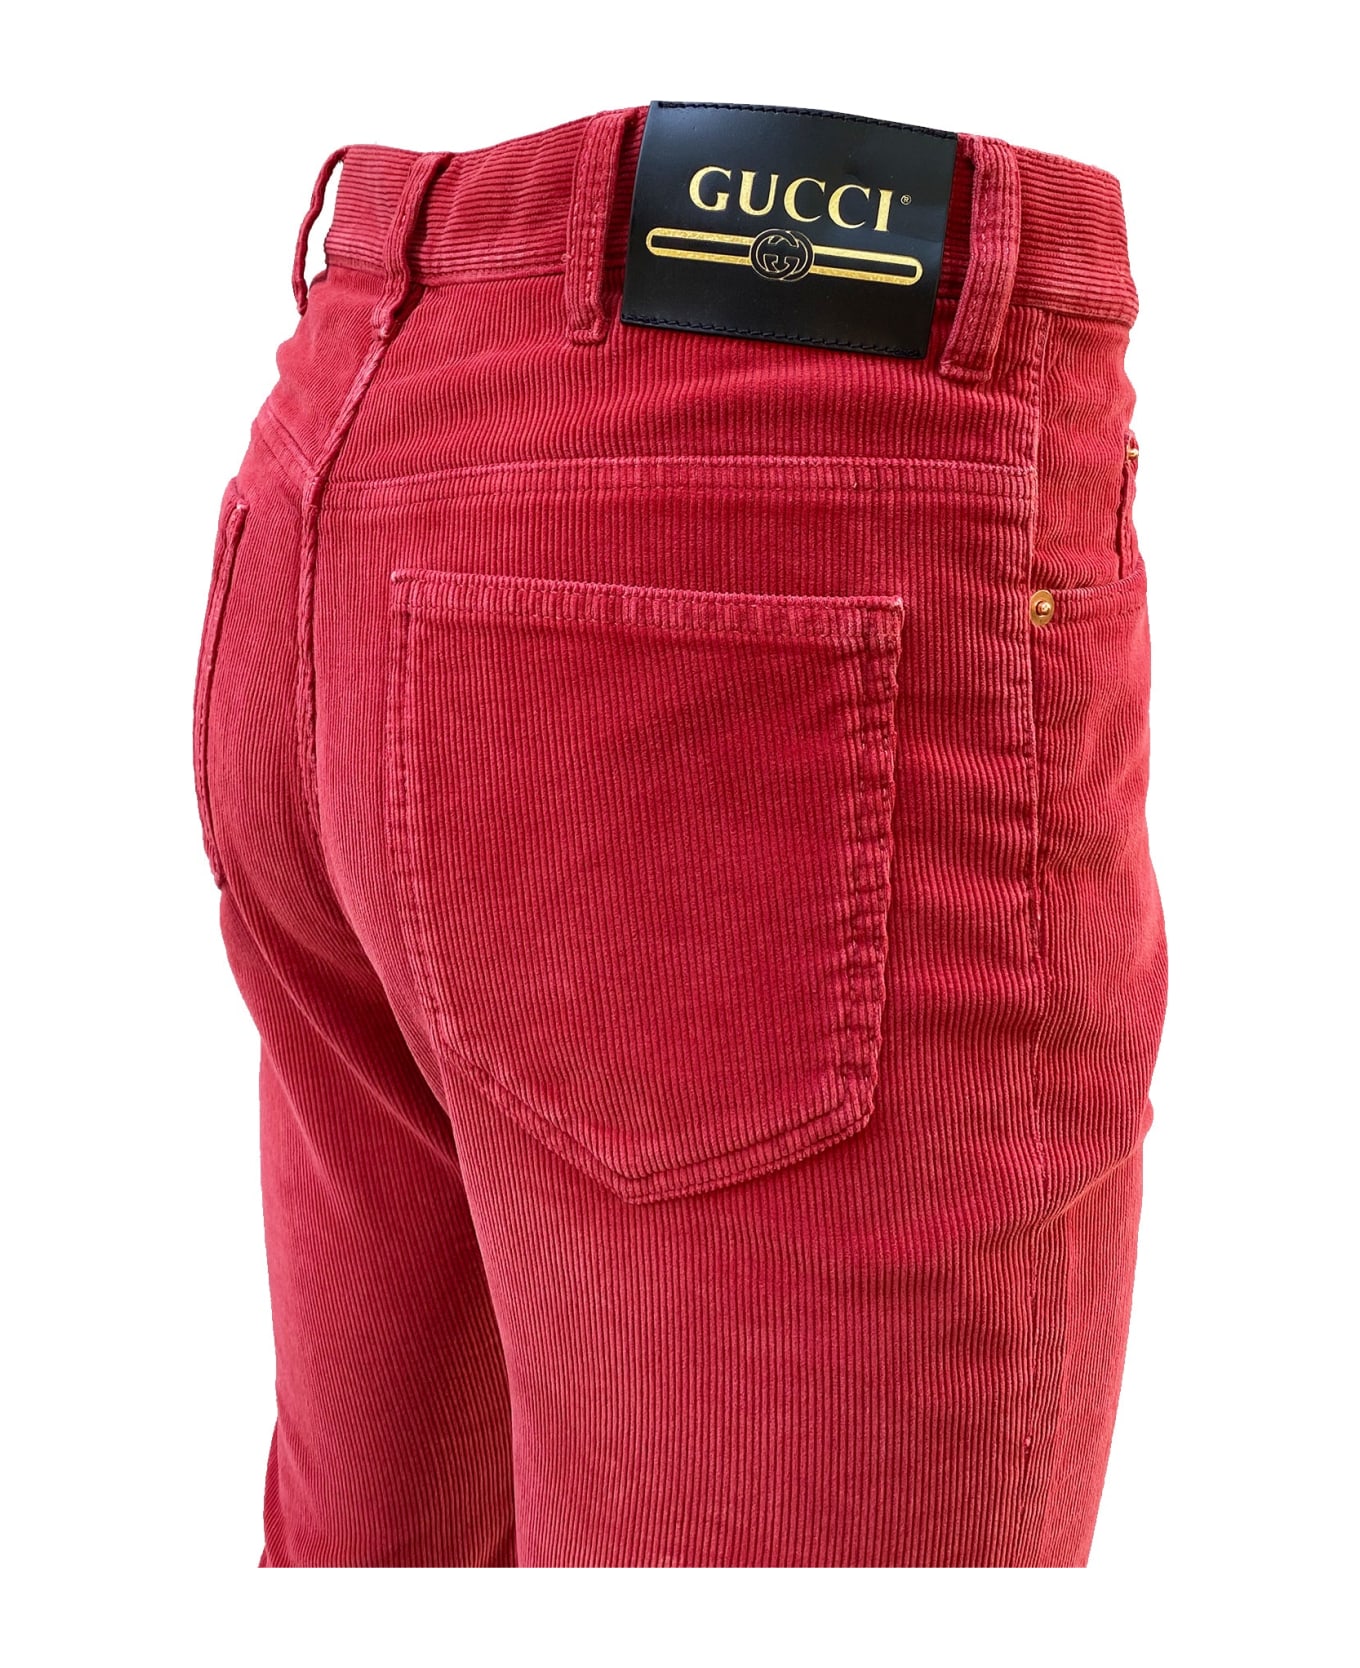 Gucci Velvet Trousers - Red